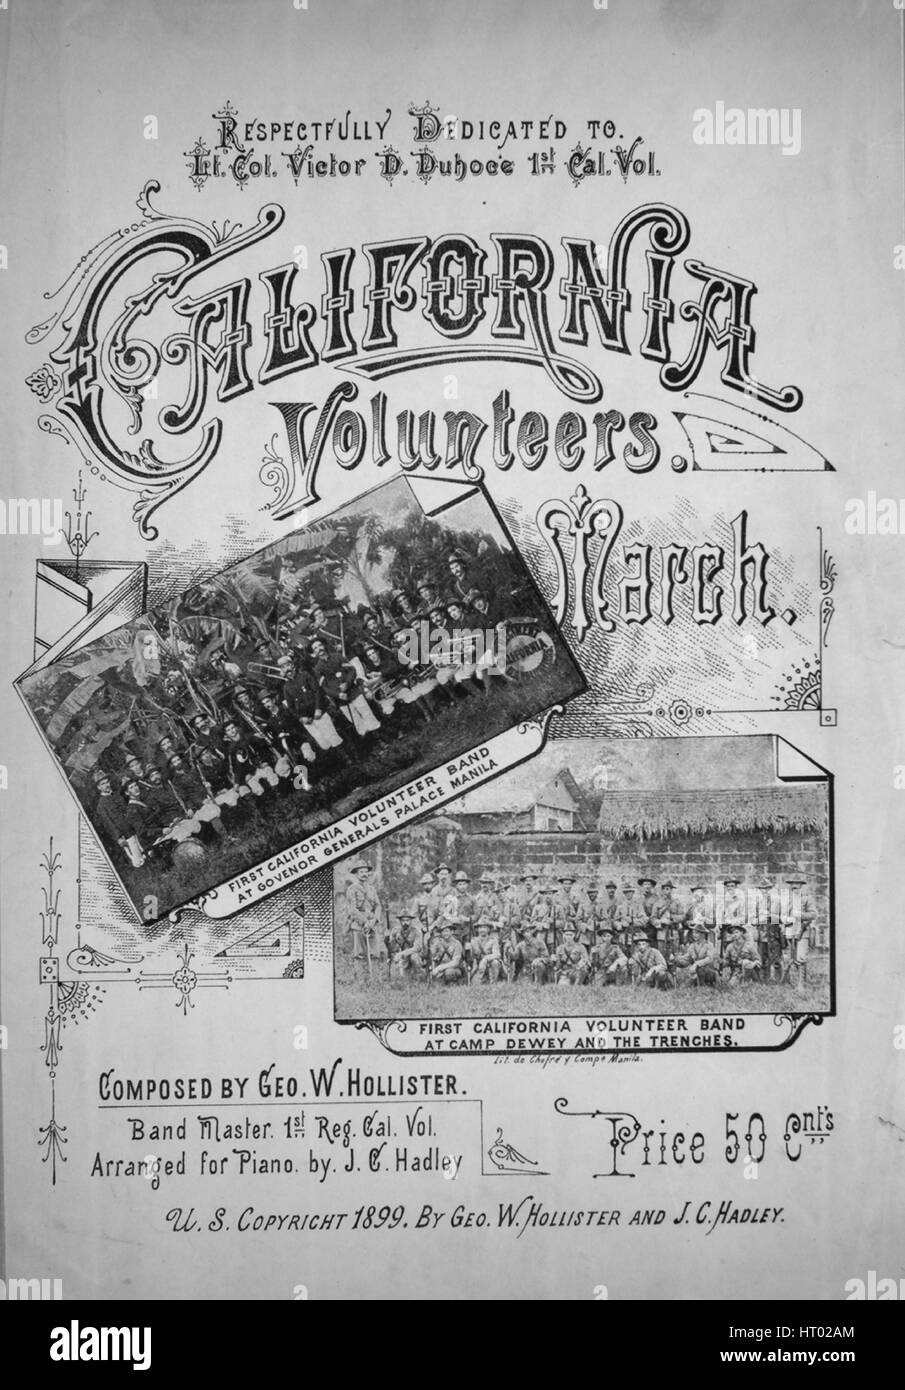 Sheet music cover image of the song 'California Volunteers March